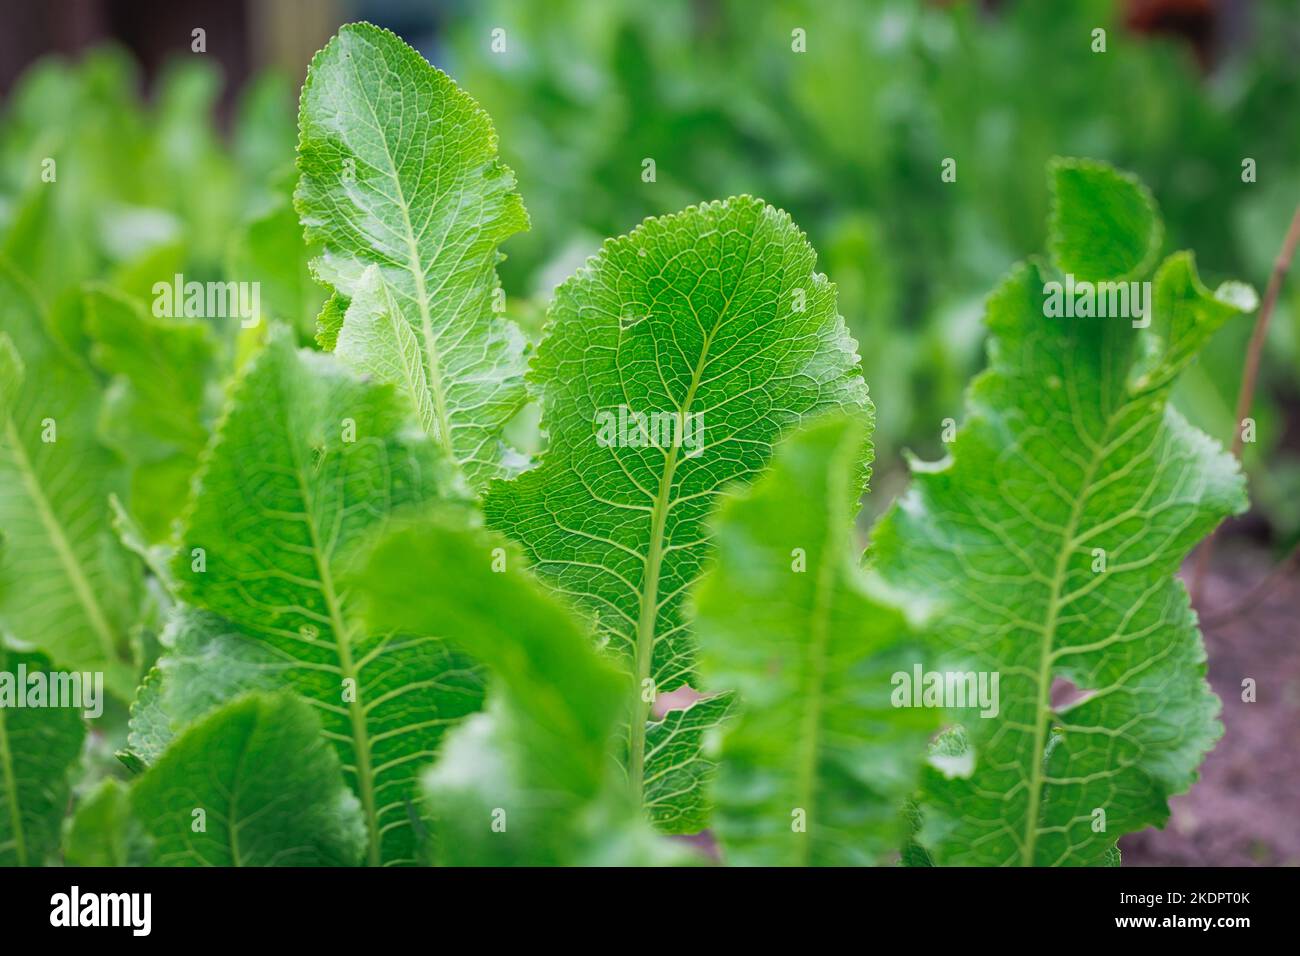 Details of leafs of horseradish plant in the garden Stock Photo